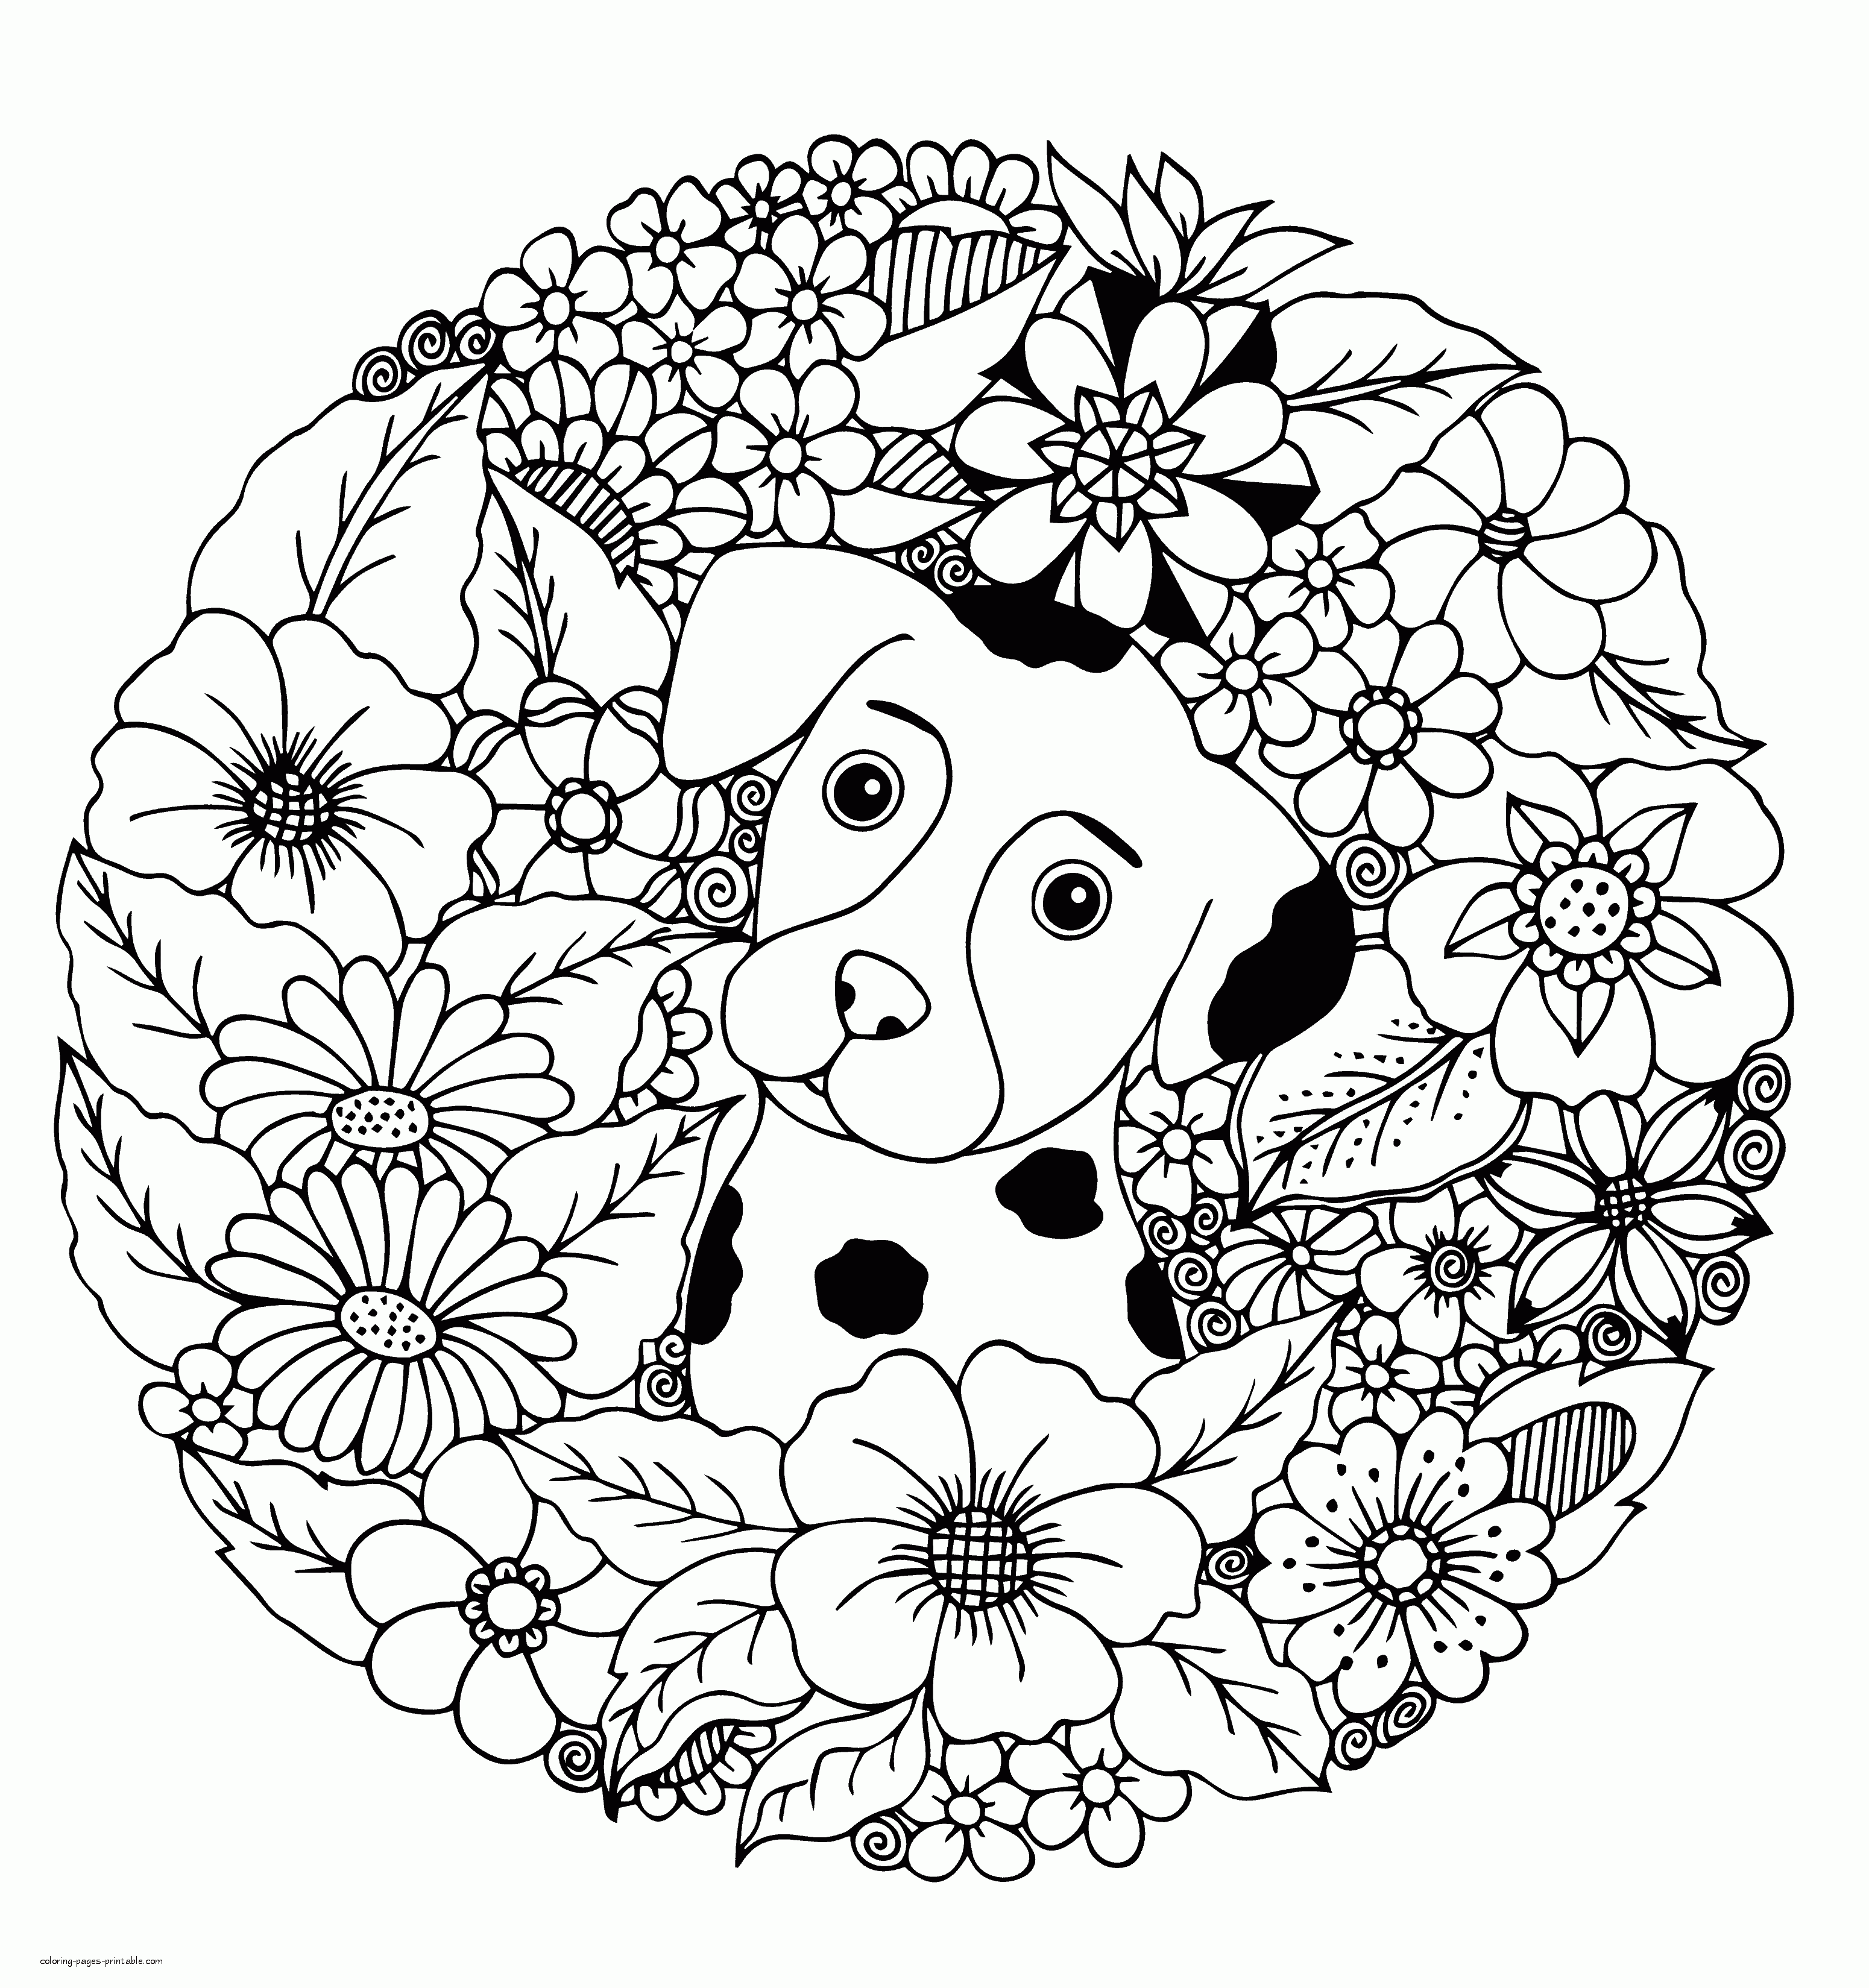 Free Puppy Coloring Pages For Adults